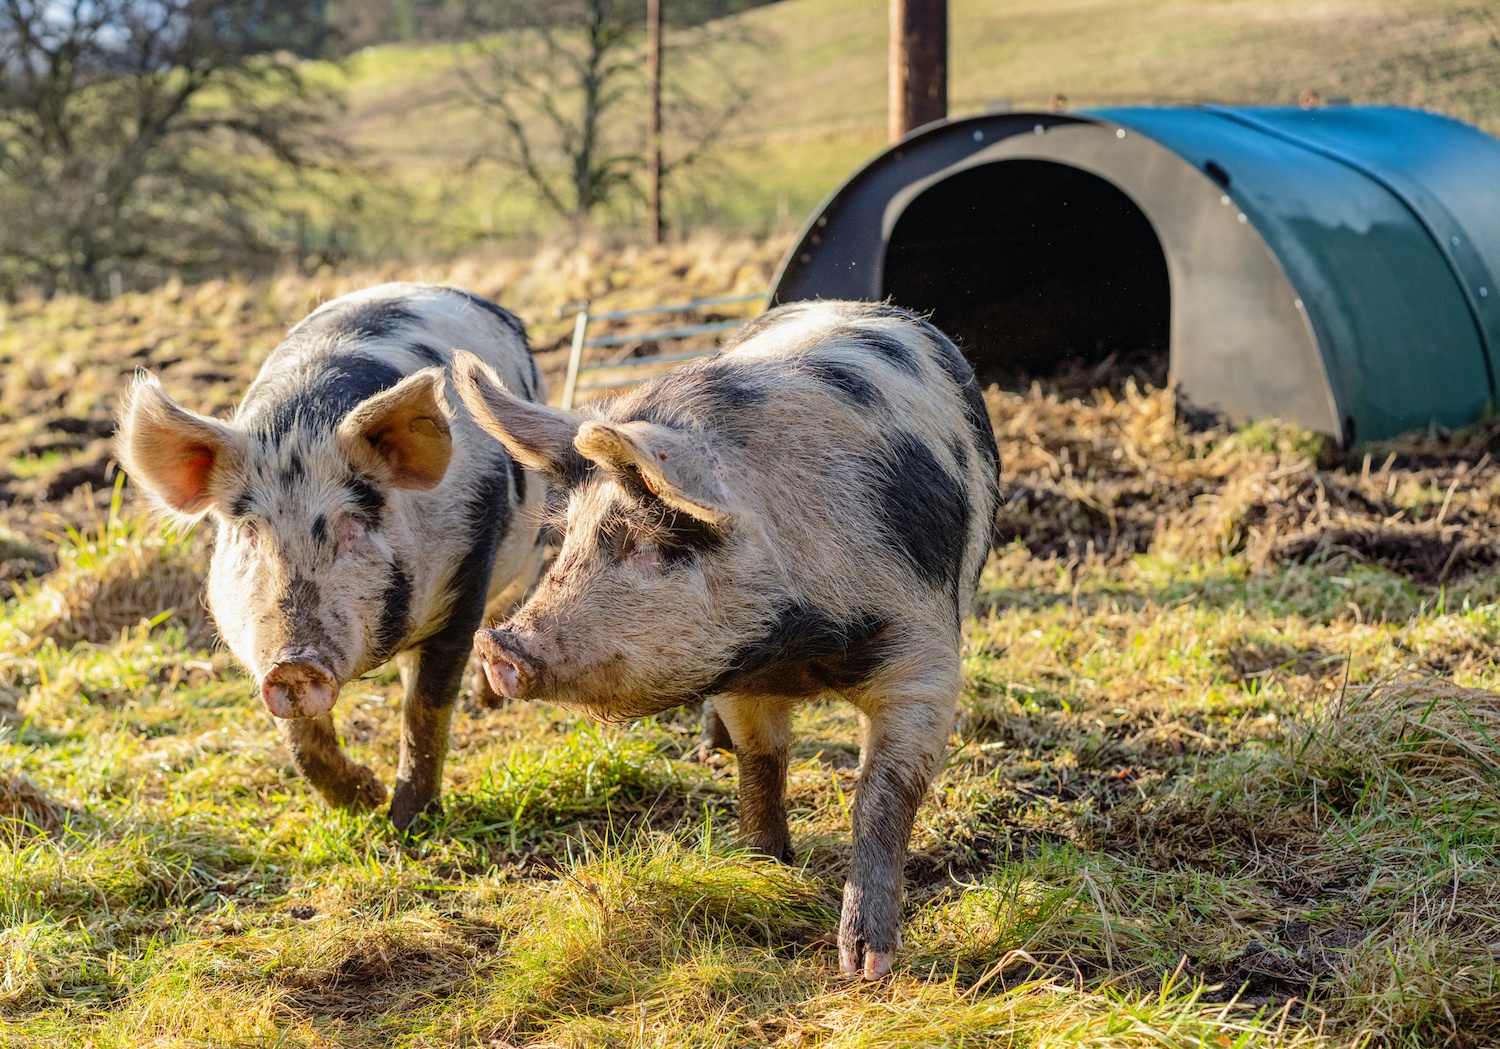 Two free range pigs in a field. October 2020